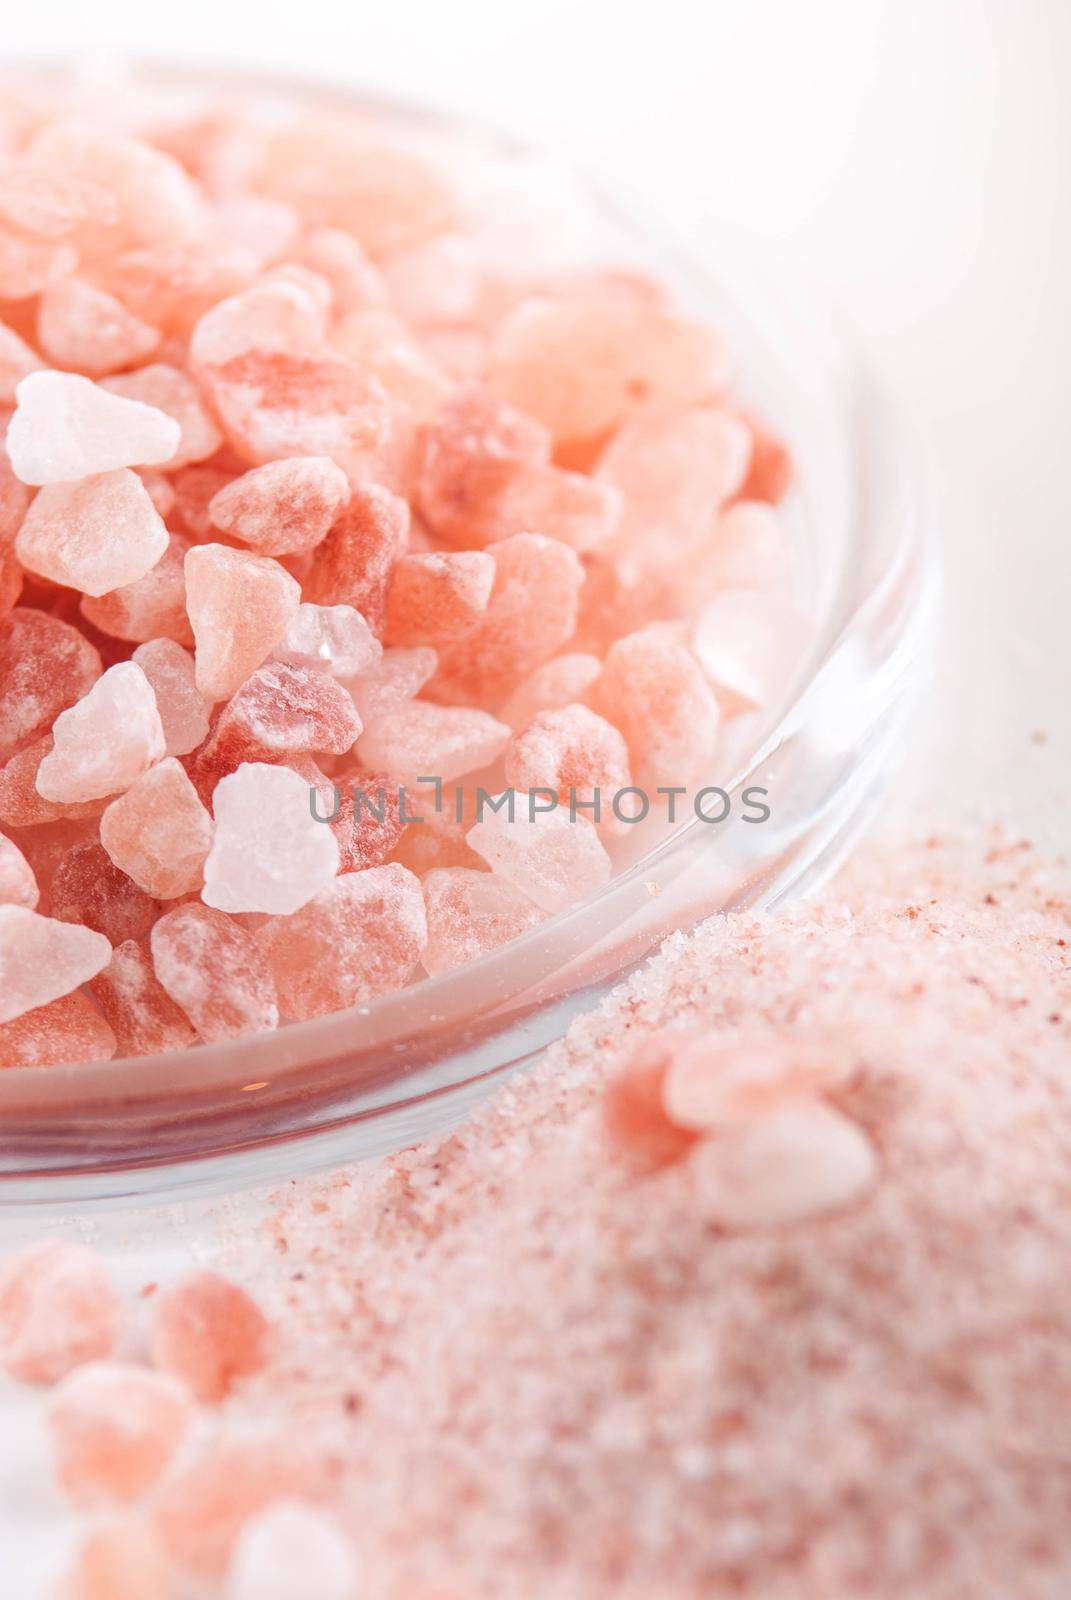 crystals of pink healthy himalayan salt in glass plate